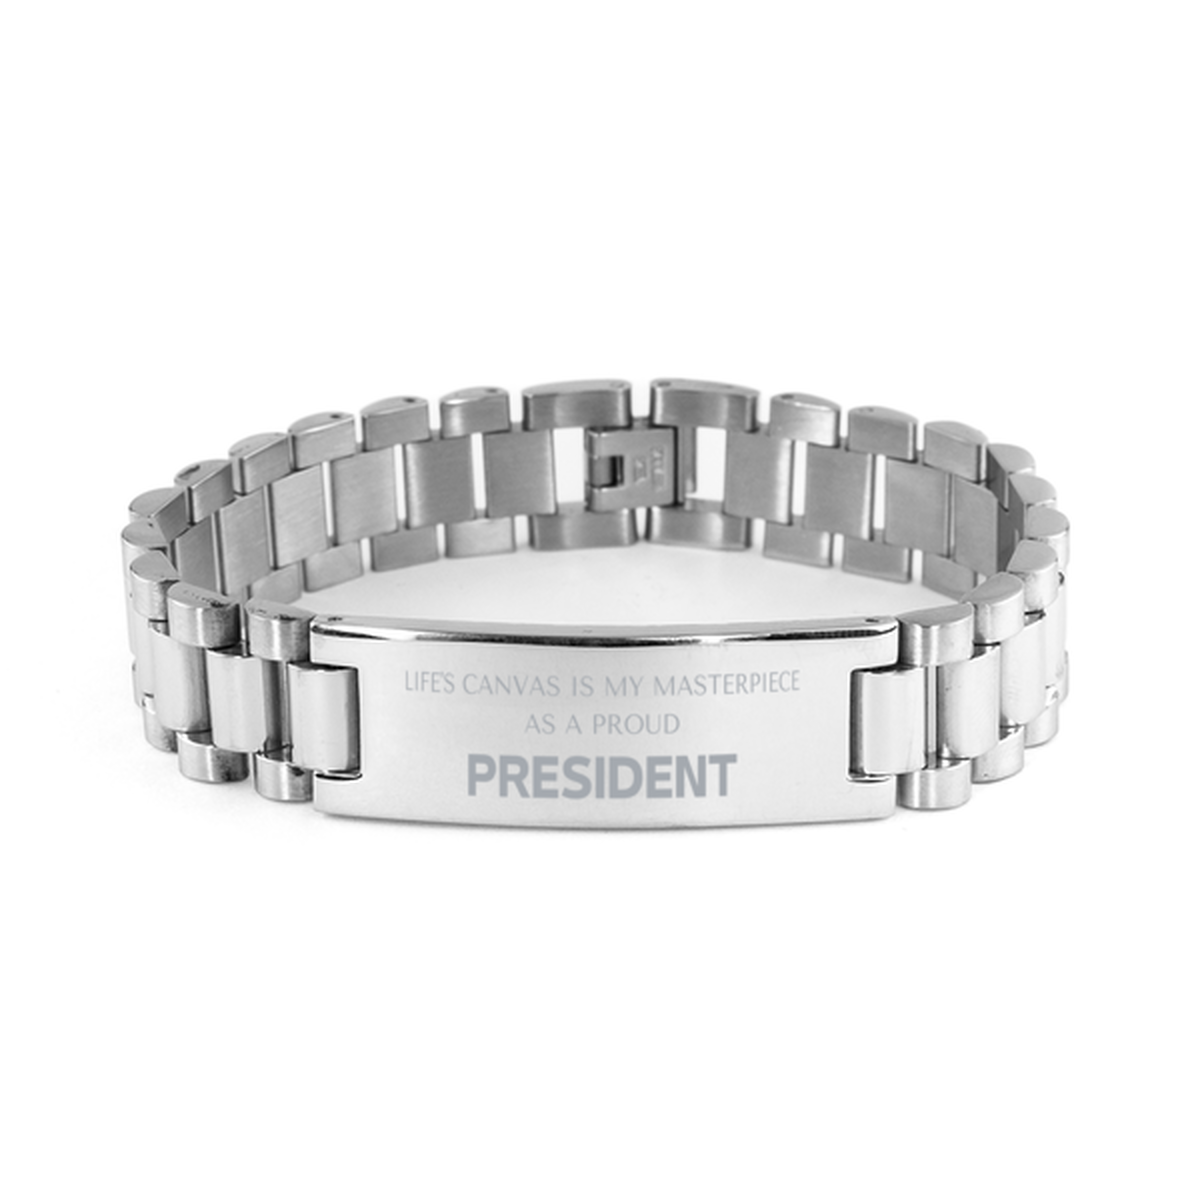 Proud President Gifts, Life's canvas is my masterpiece, Epic Birthday Christmas Unique Ladder Stainless Steel Bracelet For President, Coworkers, Men, Women, Friends